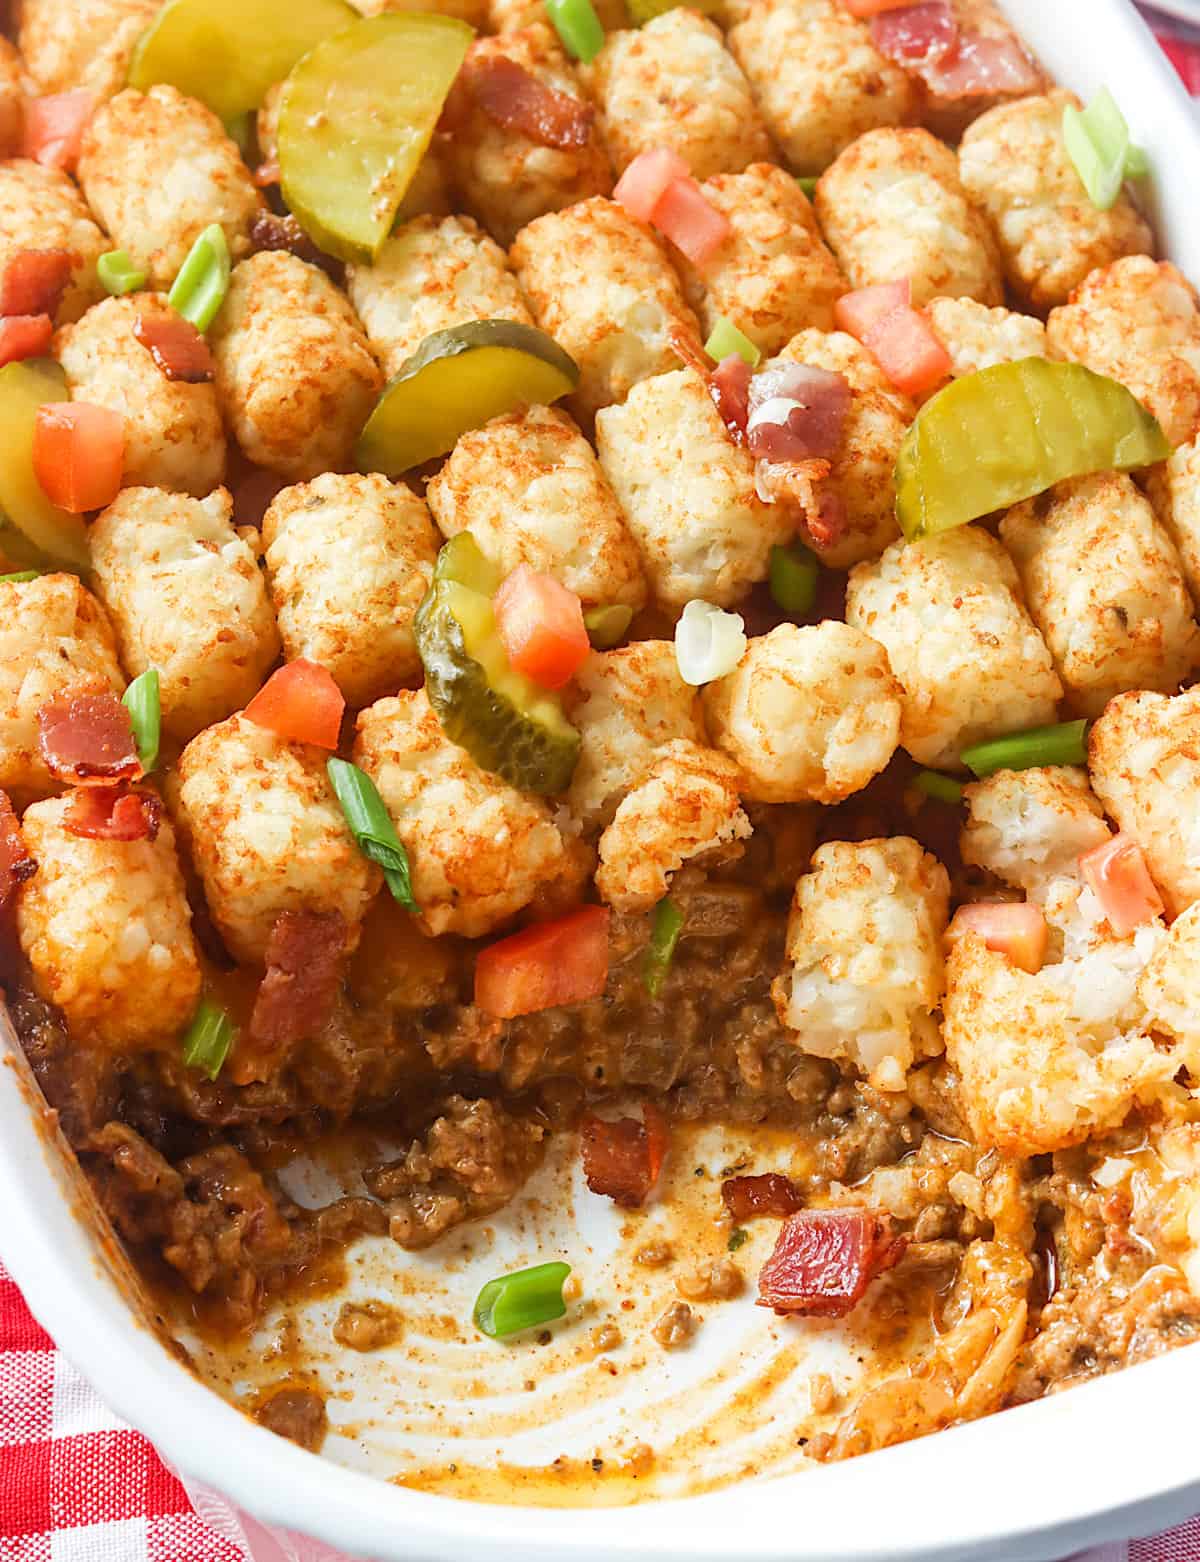 Watch this amazing cheeseburger tater tot casserole disappear with a happy smile